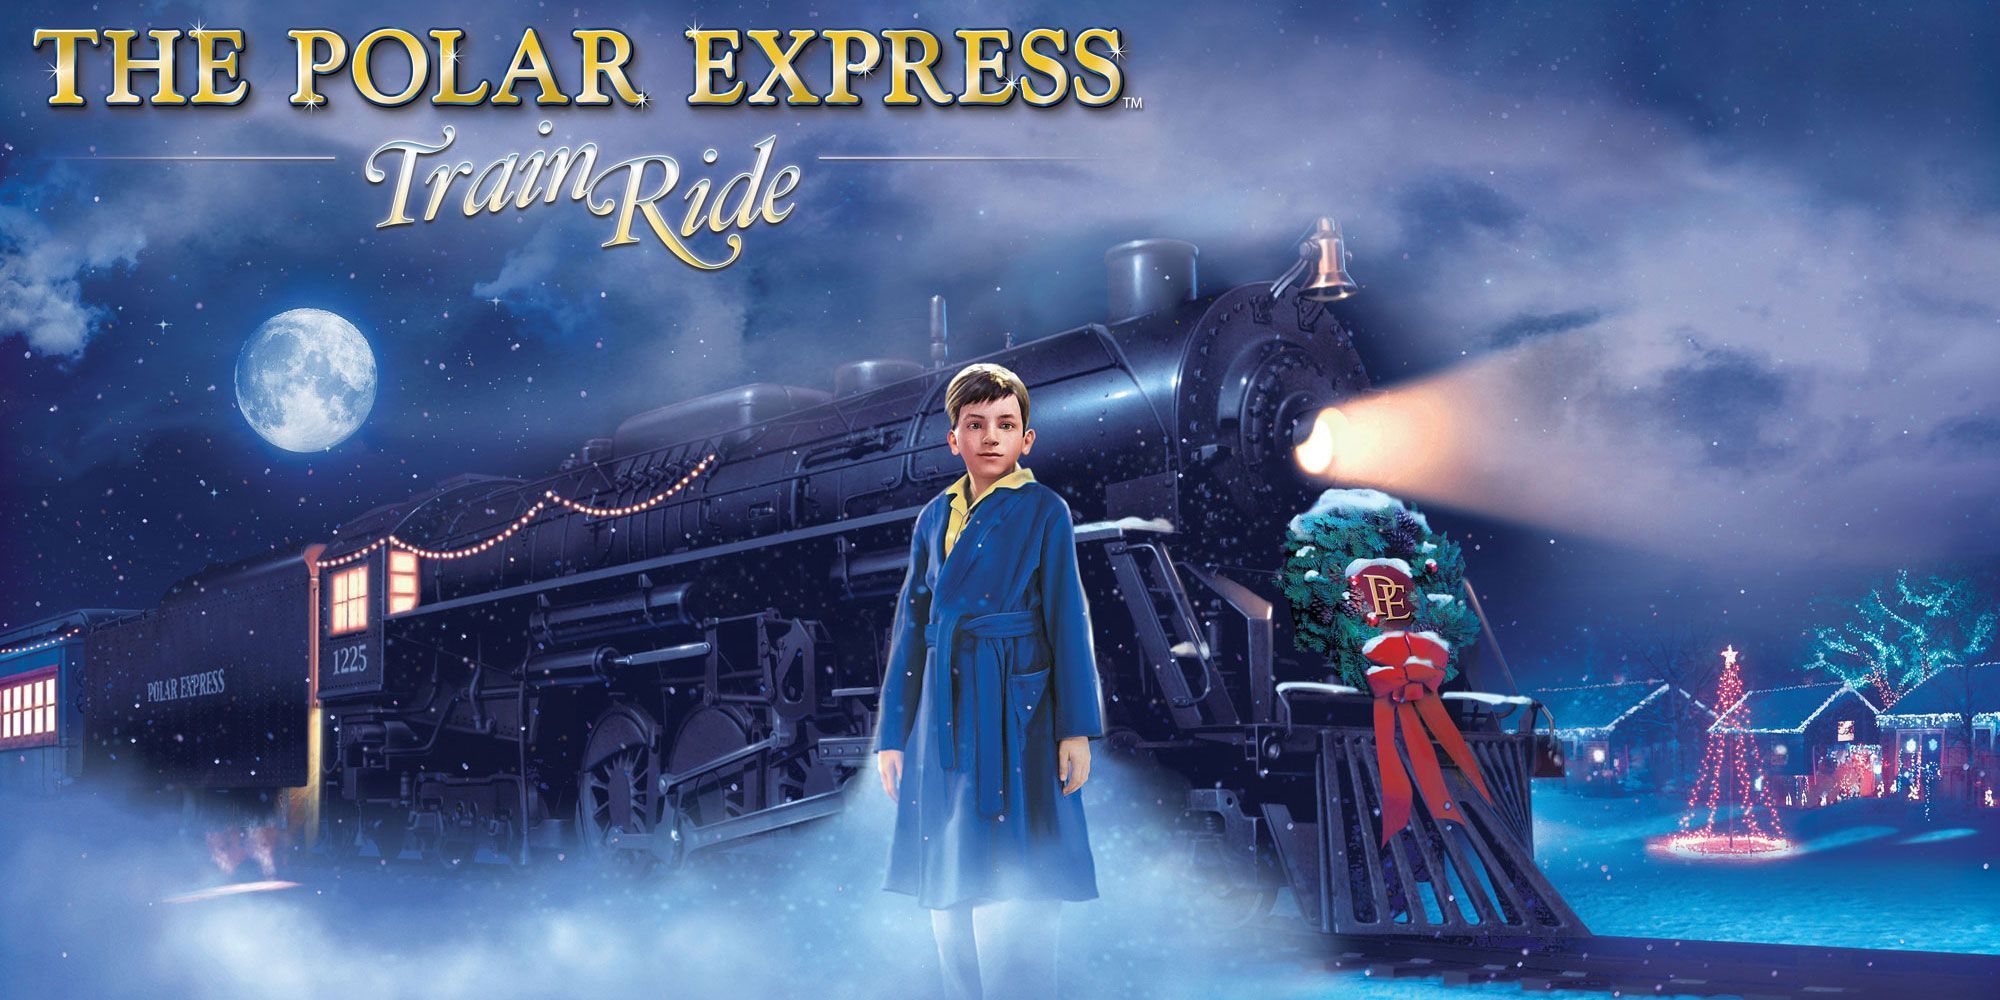 A Cover Image Of The Polar Express